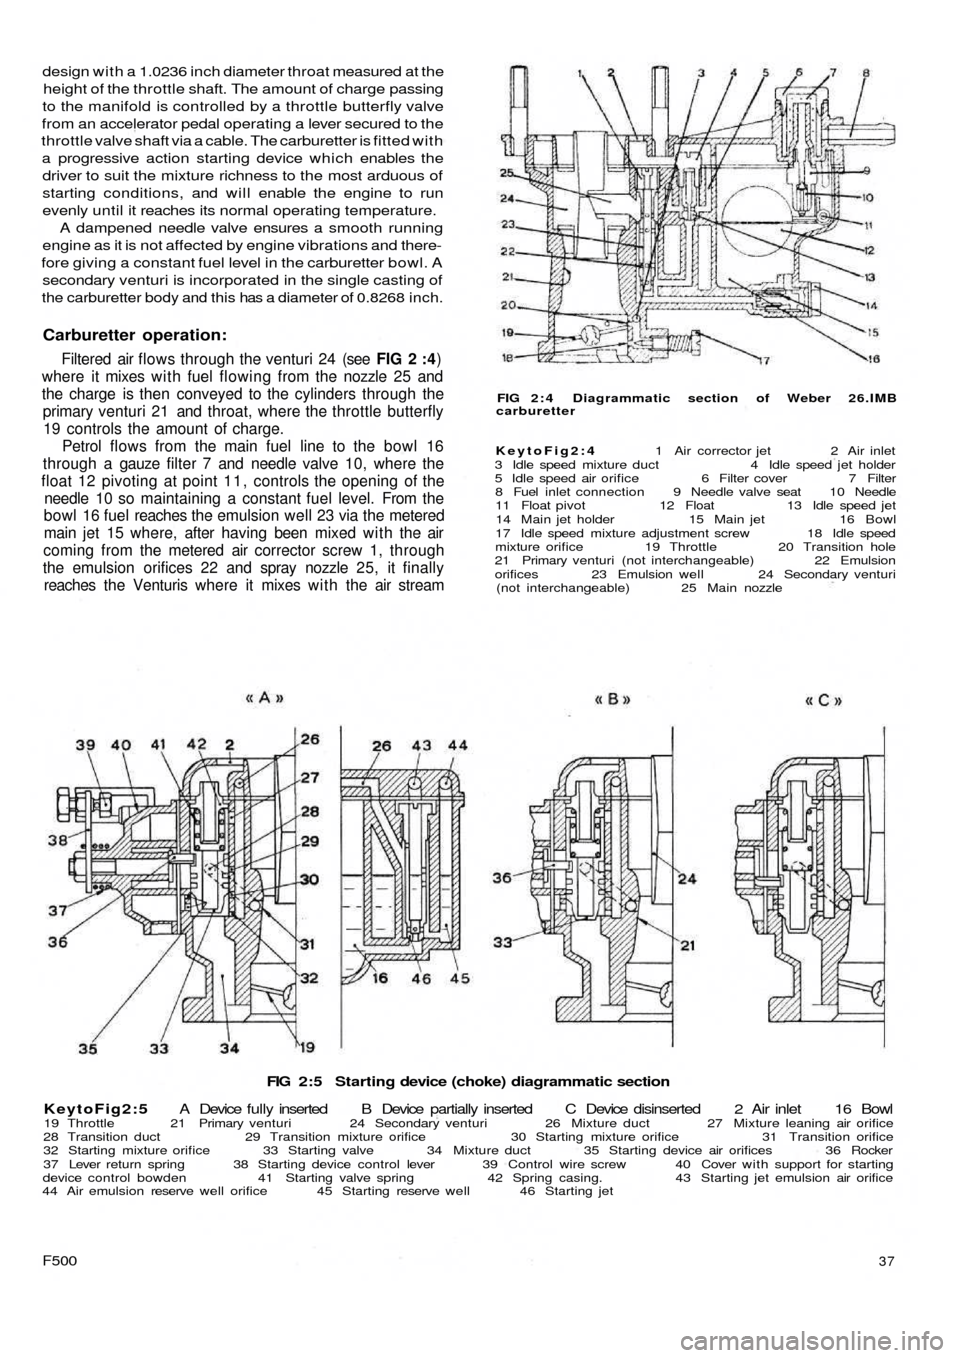 FIAT 500 1967 1.G Workshop Manual FIG 2:5  Starting device (choke) diagrammatic section
KeytoFig2:5 A  Device  fully inserted  B  Device  partially  inserted  C  Device  disinserted  2  Air  inlet 16 Bowl
19 Throttle  21 Primary ventu